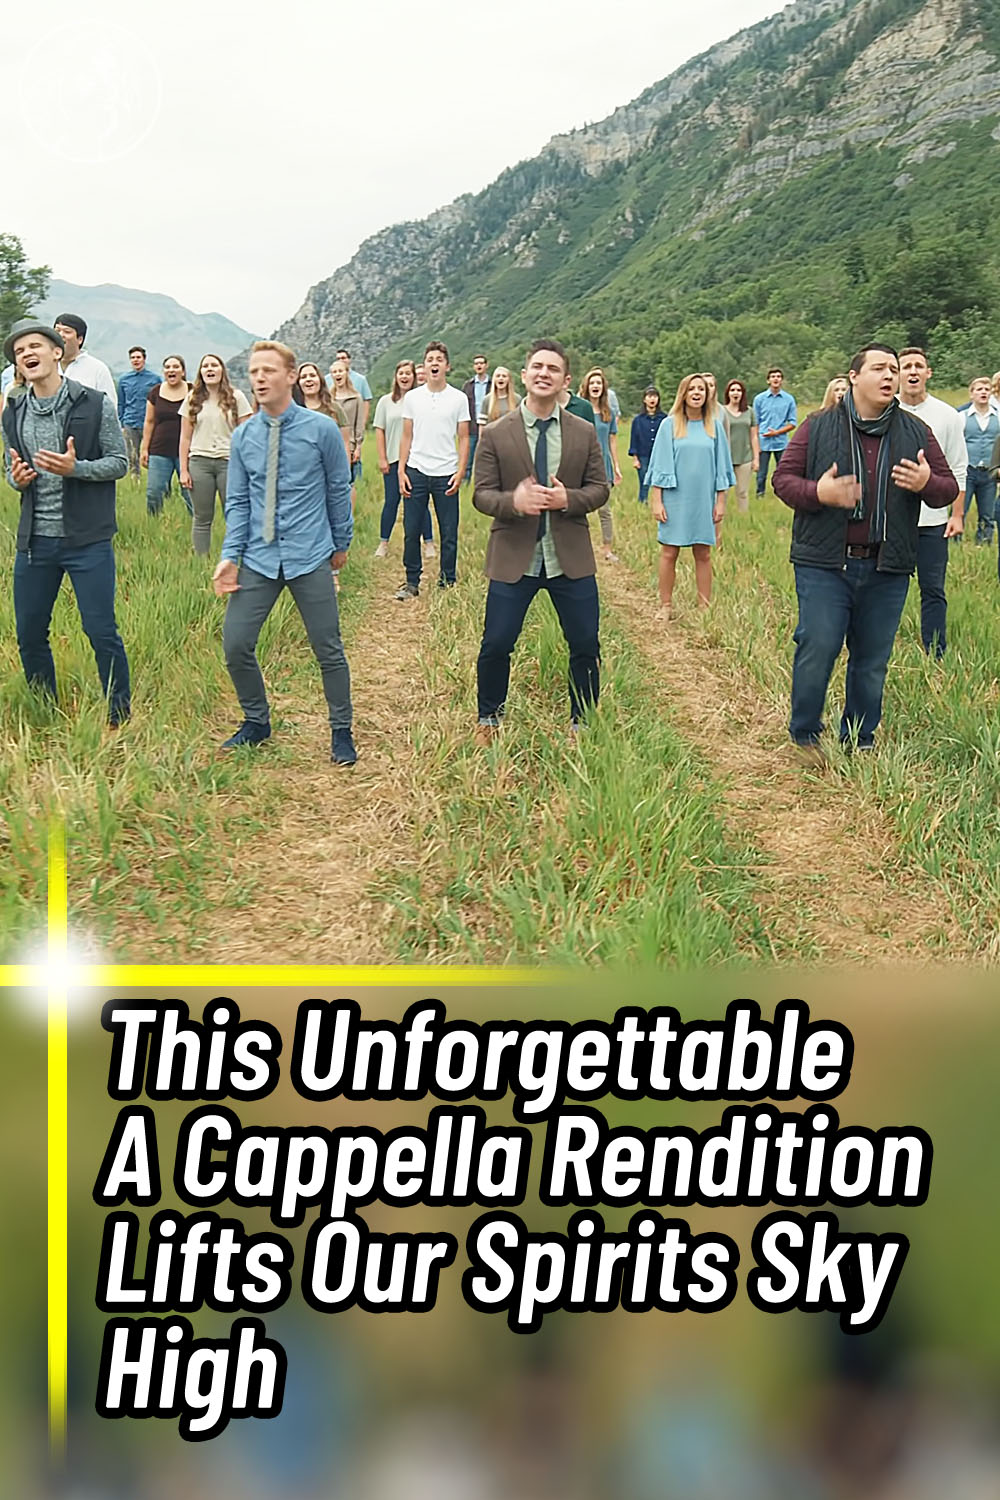 This Unforgettable A Cappella Rendition Lifts Our Spirits Sky High